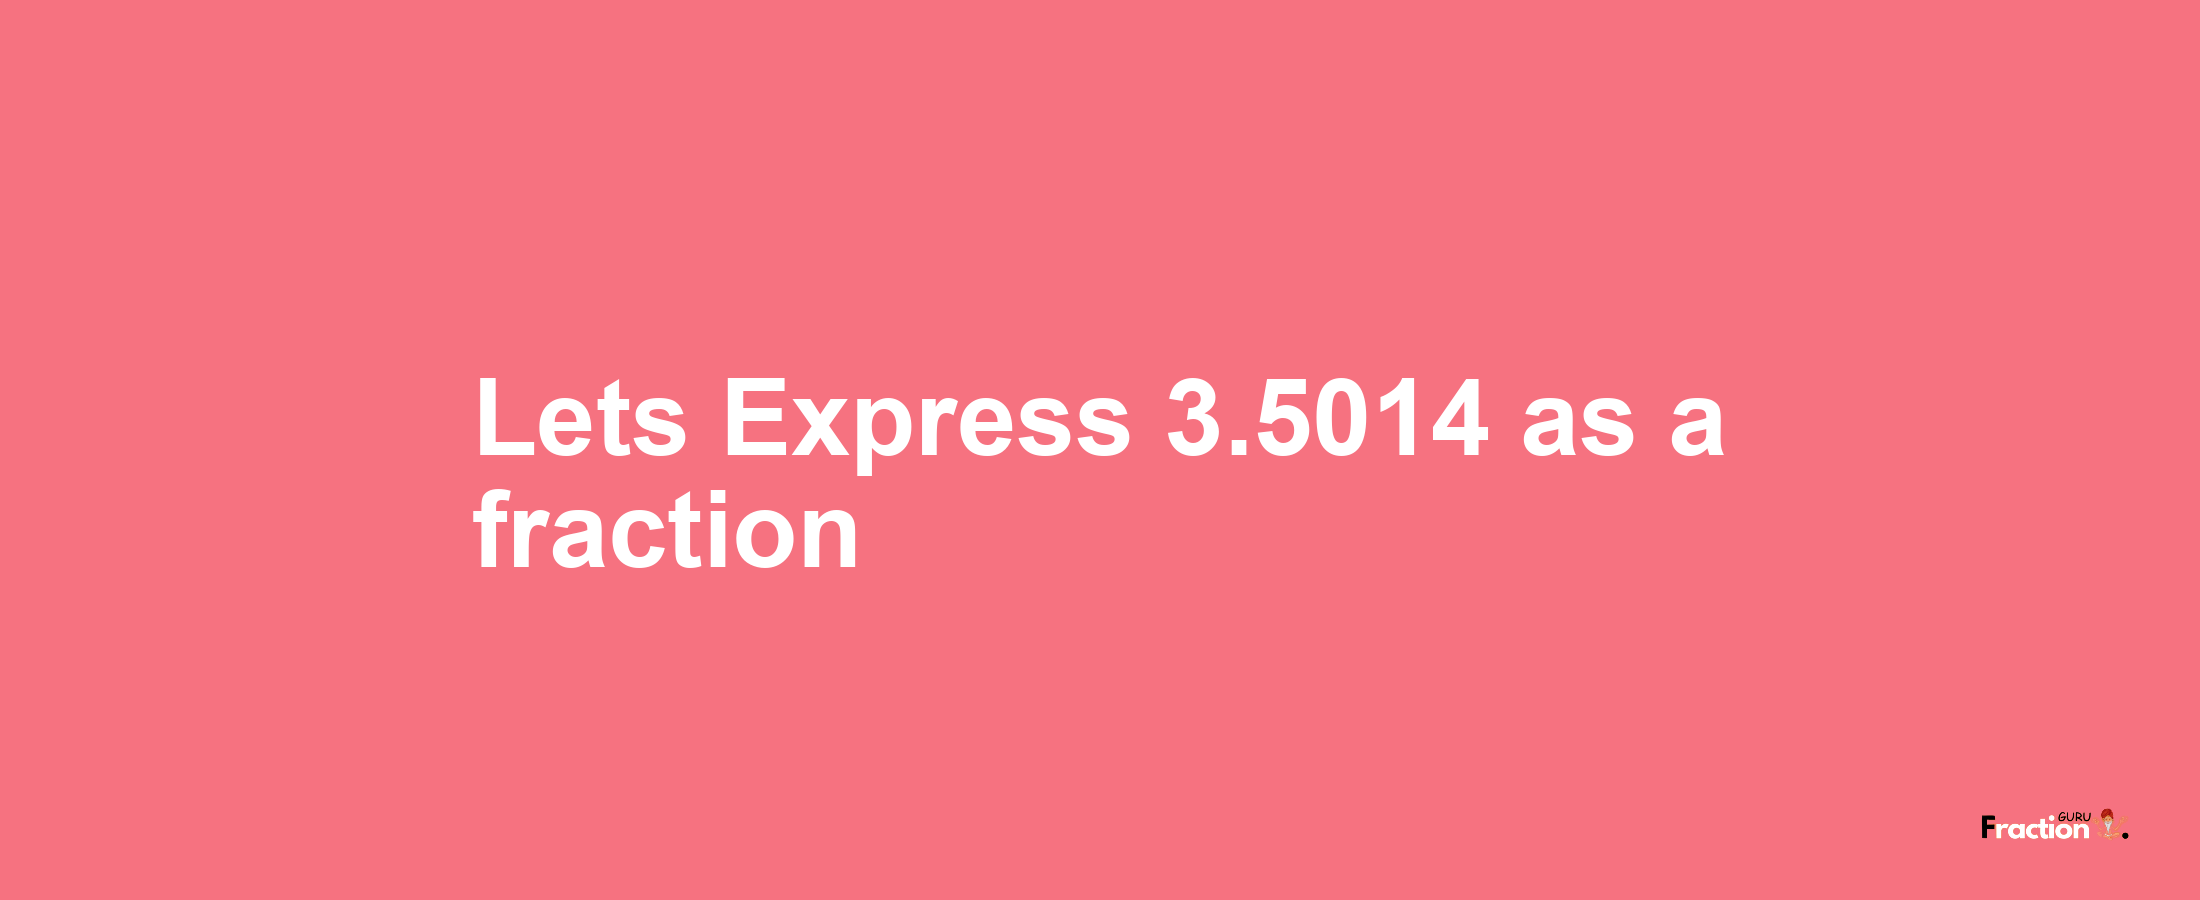 Lets Express 3.5014 as afraction